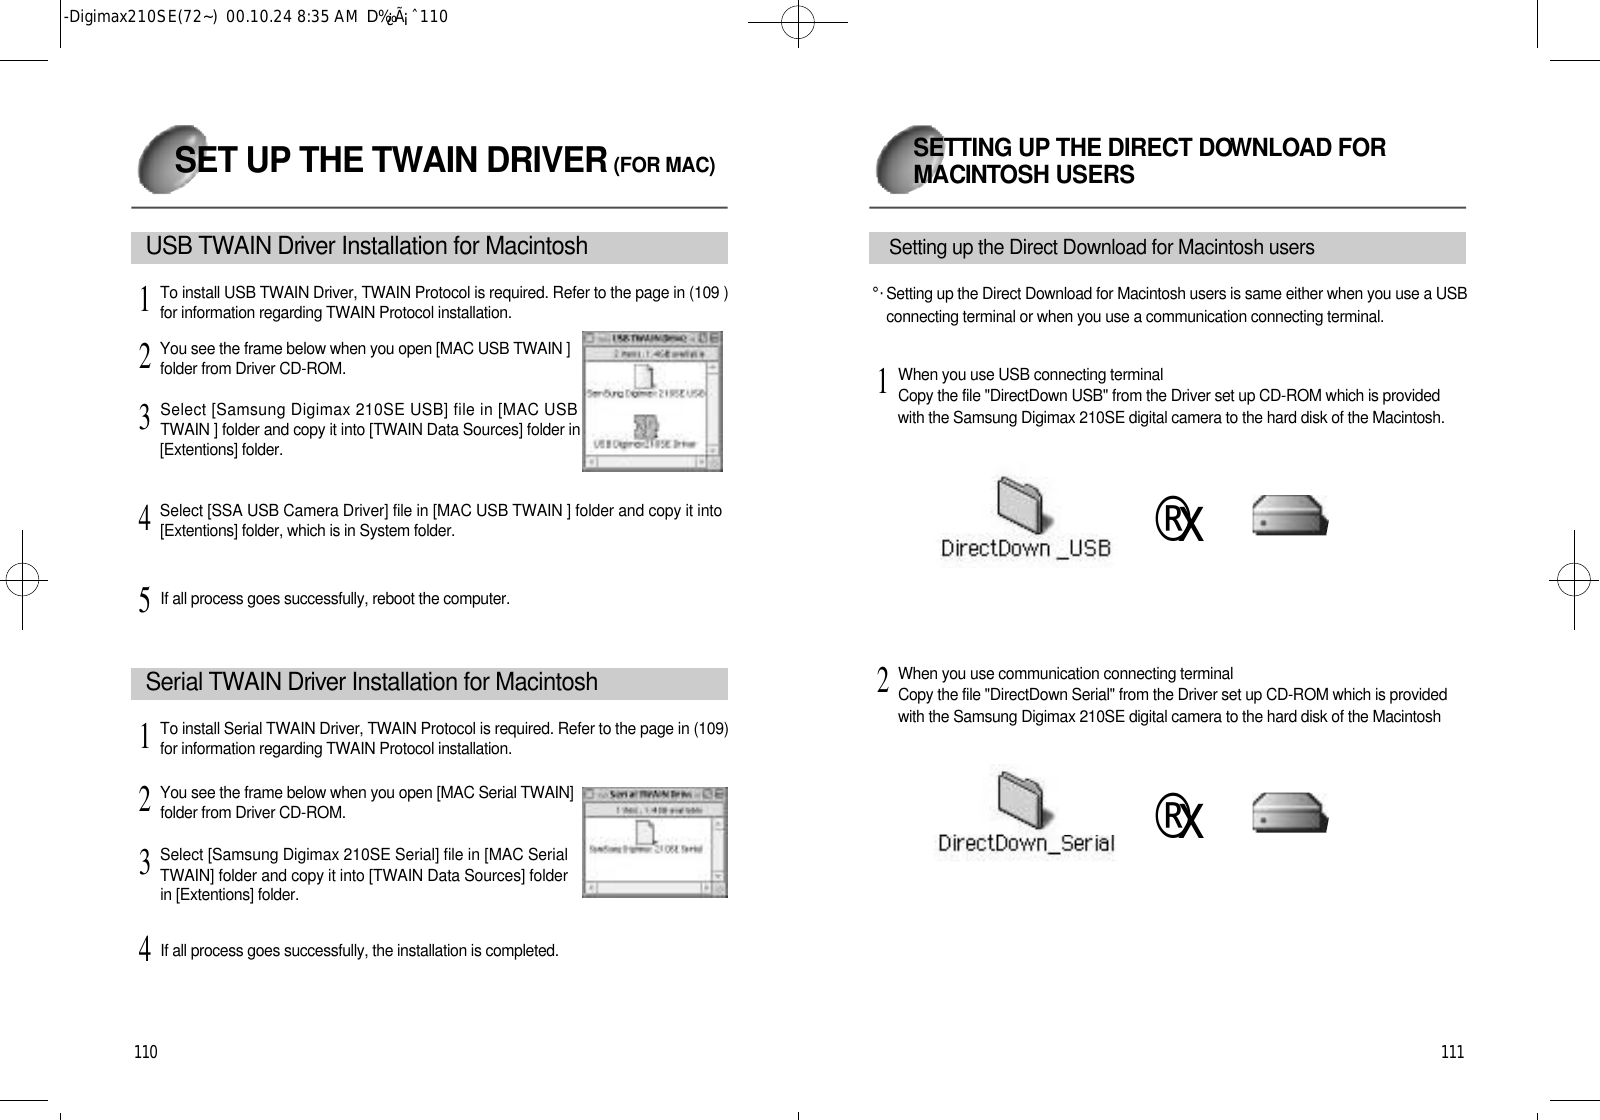 1 1 1SETTING UP THE DIRECT DOW N L OAD FORM AC I N T OSH USERS1 1 0If all process goes successfully, reboot the computer.5SET UP THE TWAIN DRIVER (FOR MAC)USB TWAIN Dri v er Installation for MacintoshTo install USB TWAIN Driver, TWAIN Protocol is required. Refer to the page in (109 )for information regarding TWAIN Protocol installation.1You see the frame below when you open [MAC USB TWAIN ]folder from Driver CD-ROM.2Select [Samsung Digimax 210SE USB] file in [MAC USBTWAIN ] folder and copy it into [TWAIN Data Sources] folder in[Extentions] folder.3Select [SSA USB Camera Driver] file in [MAC USB TWAIN ] folder and copy it into[Extentions] folder, which is in System folder.4S e rial TWAIN Dri v er Installation for MacintoshTo install Serial TWAIN Driver, TWAIN Protocol is required. Refer to the page in (109)for information regarding TWAIN Protocol installation.1You see the frame below when you open [MAC Serial TWAIN]folder from Driver CD-ROM.2Select [Samsung Digimax 210SE Serial] file in [MAC SerialTWAIN] folder and copy it into [TWAIN Data Sources] folderin [Extentions] folder.3If all process goes successfully, the installation is completed.4°·Setting up the Direct Download for Macintosh users is same either when you use a USBconnecting terminal or when you use a communication connecting terminal.Setting up the Direct Download for Macintosh usersWhen you use USB connecting terminalCopy the file &quot;DirectDown USB&quot; from the Driver set up CD-ROM which is providedwith the Samsung Digimax 210SE digital camera to the hard disk of the Macintosh.1When you use communication connecting terminalCopy the file &quot;DirectDown Serial&quot; from the Driver set up CD-ROM which is providedwith the Samsung Digimax 210SE digital camera to the hard disk of the Macintosh2®x®x-Digimax210SE(72~)  00.10.24 8:35 AM  D‰¿Ã¡ˆ110